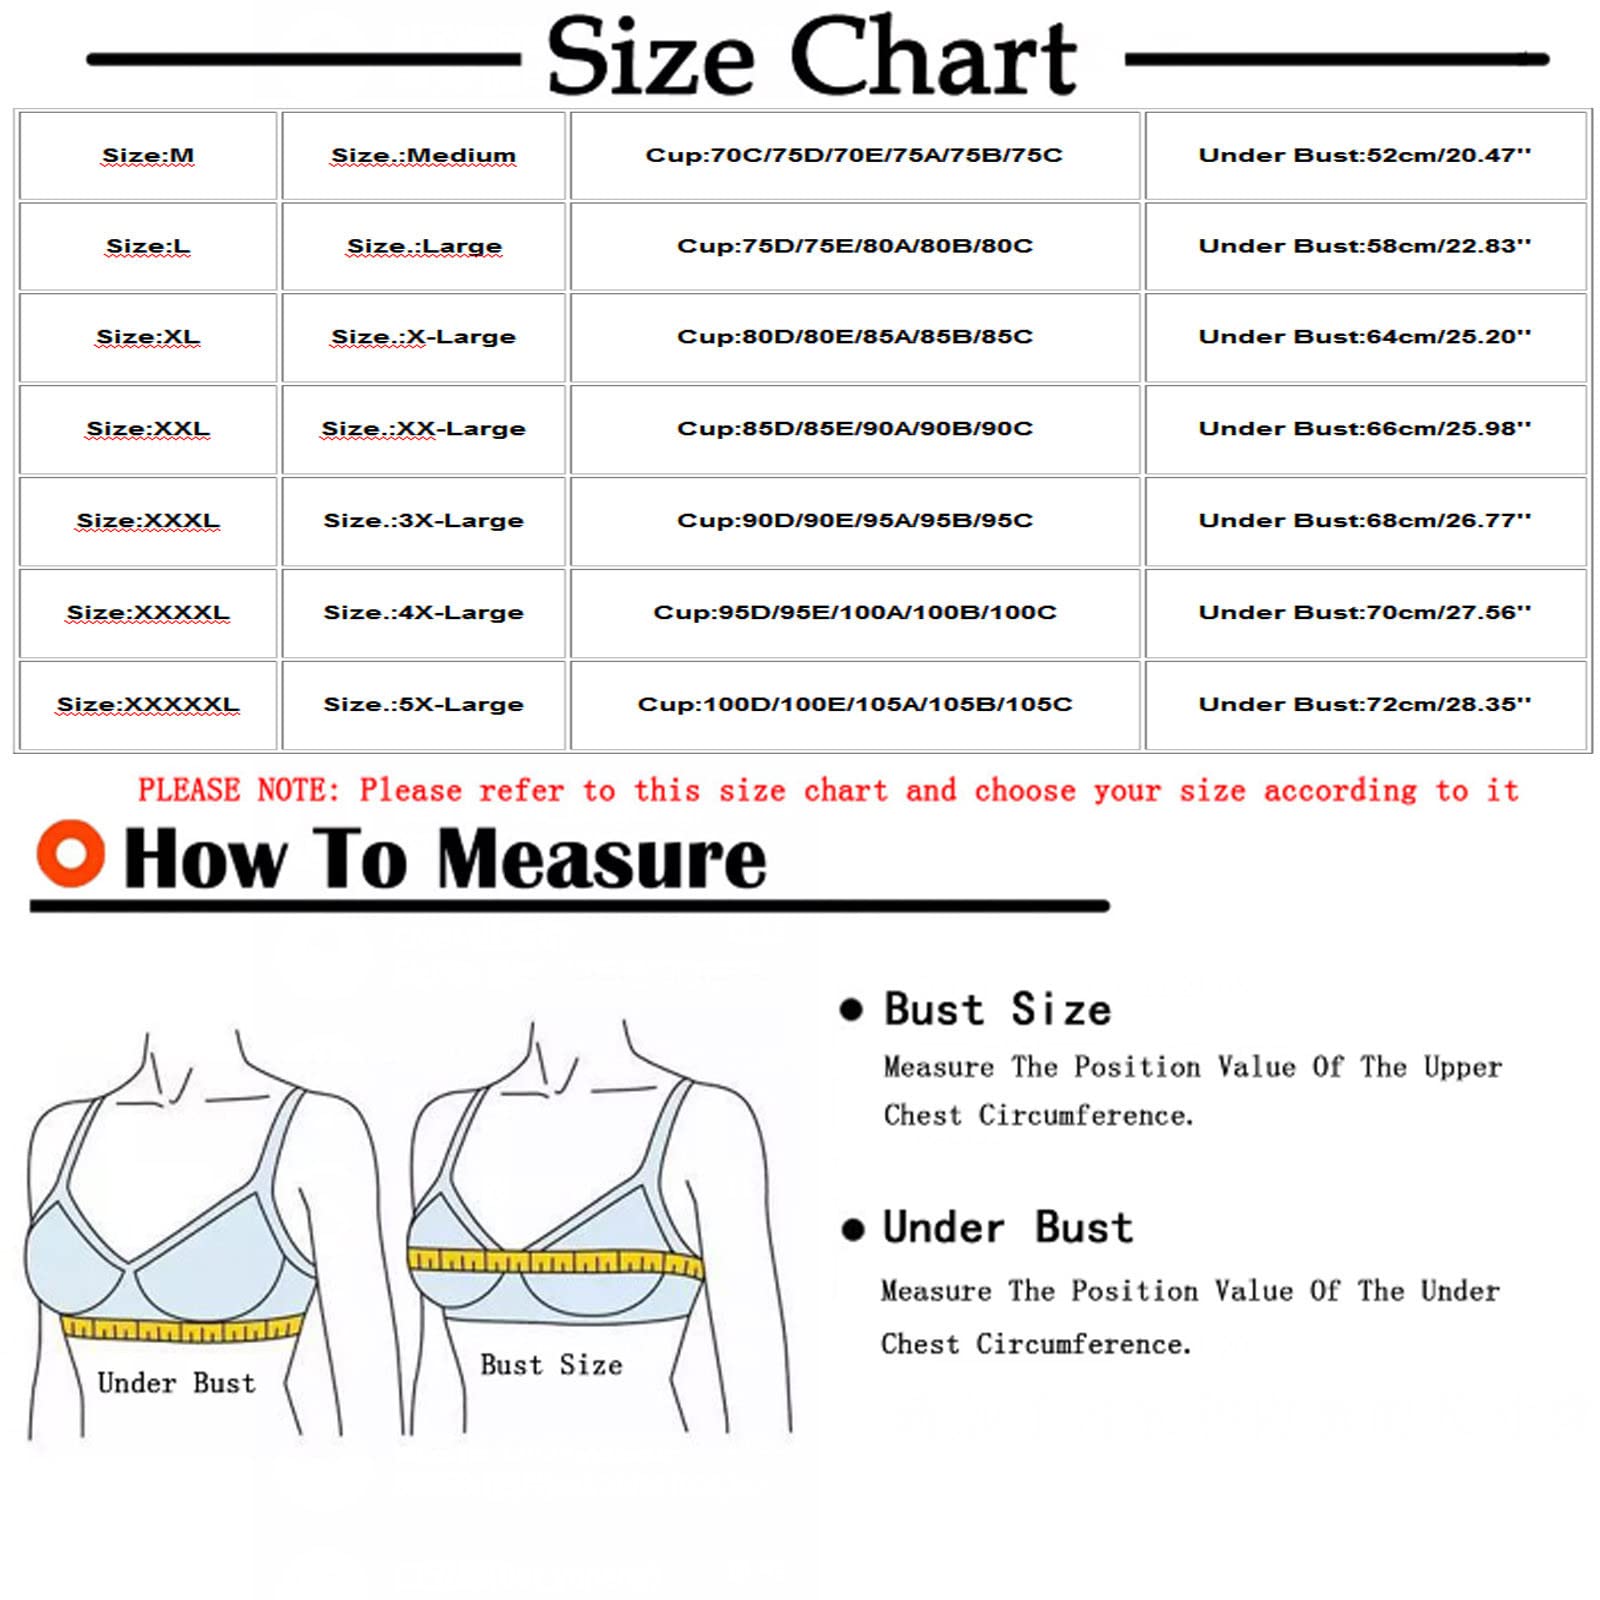 2PC Bras for Women Solid Lace Trimmed Push Up Bra Strap Wrap Hollow Out Beauty Back Bra No Underwire